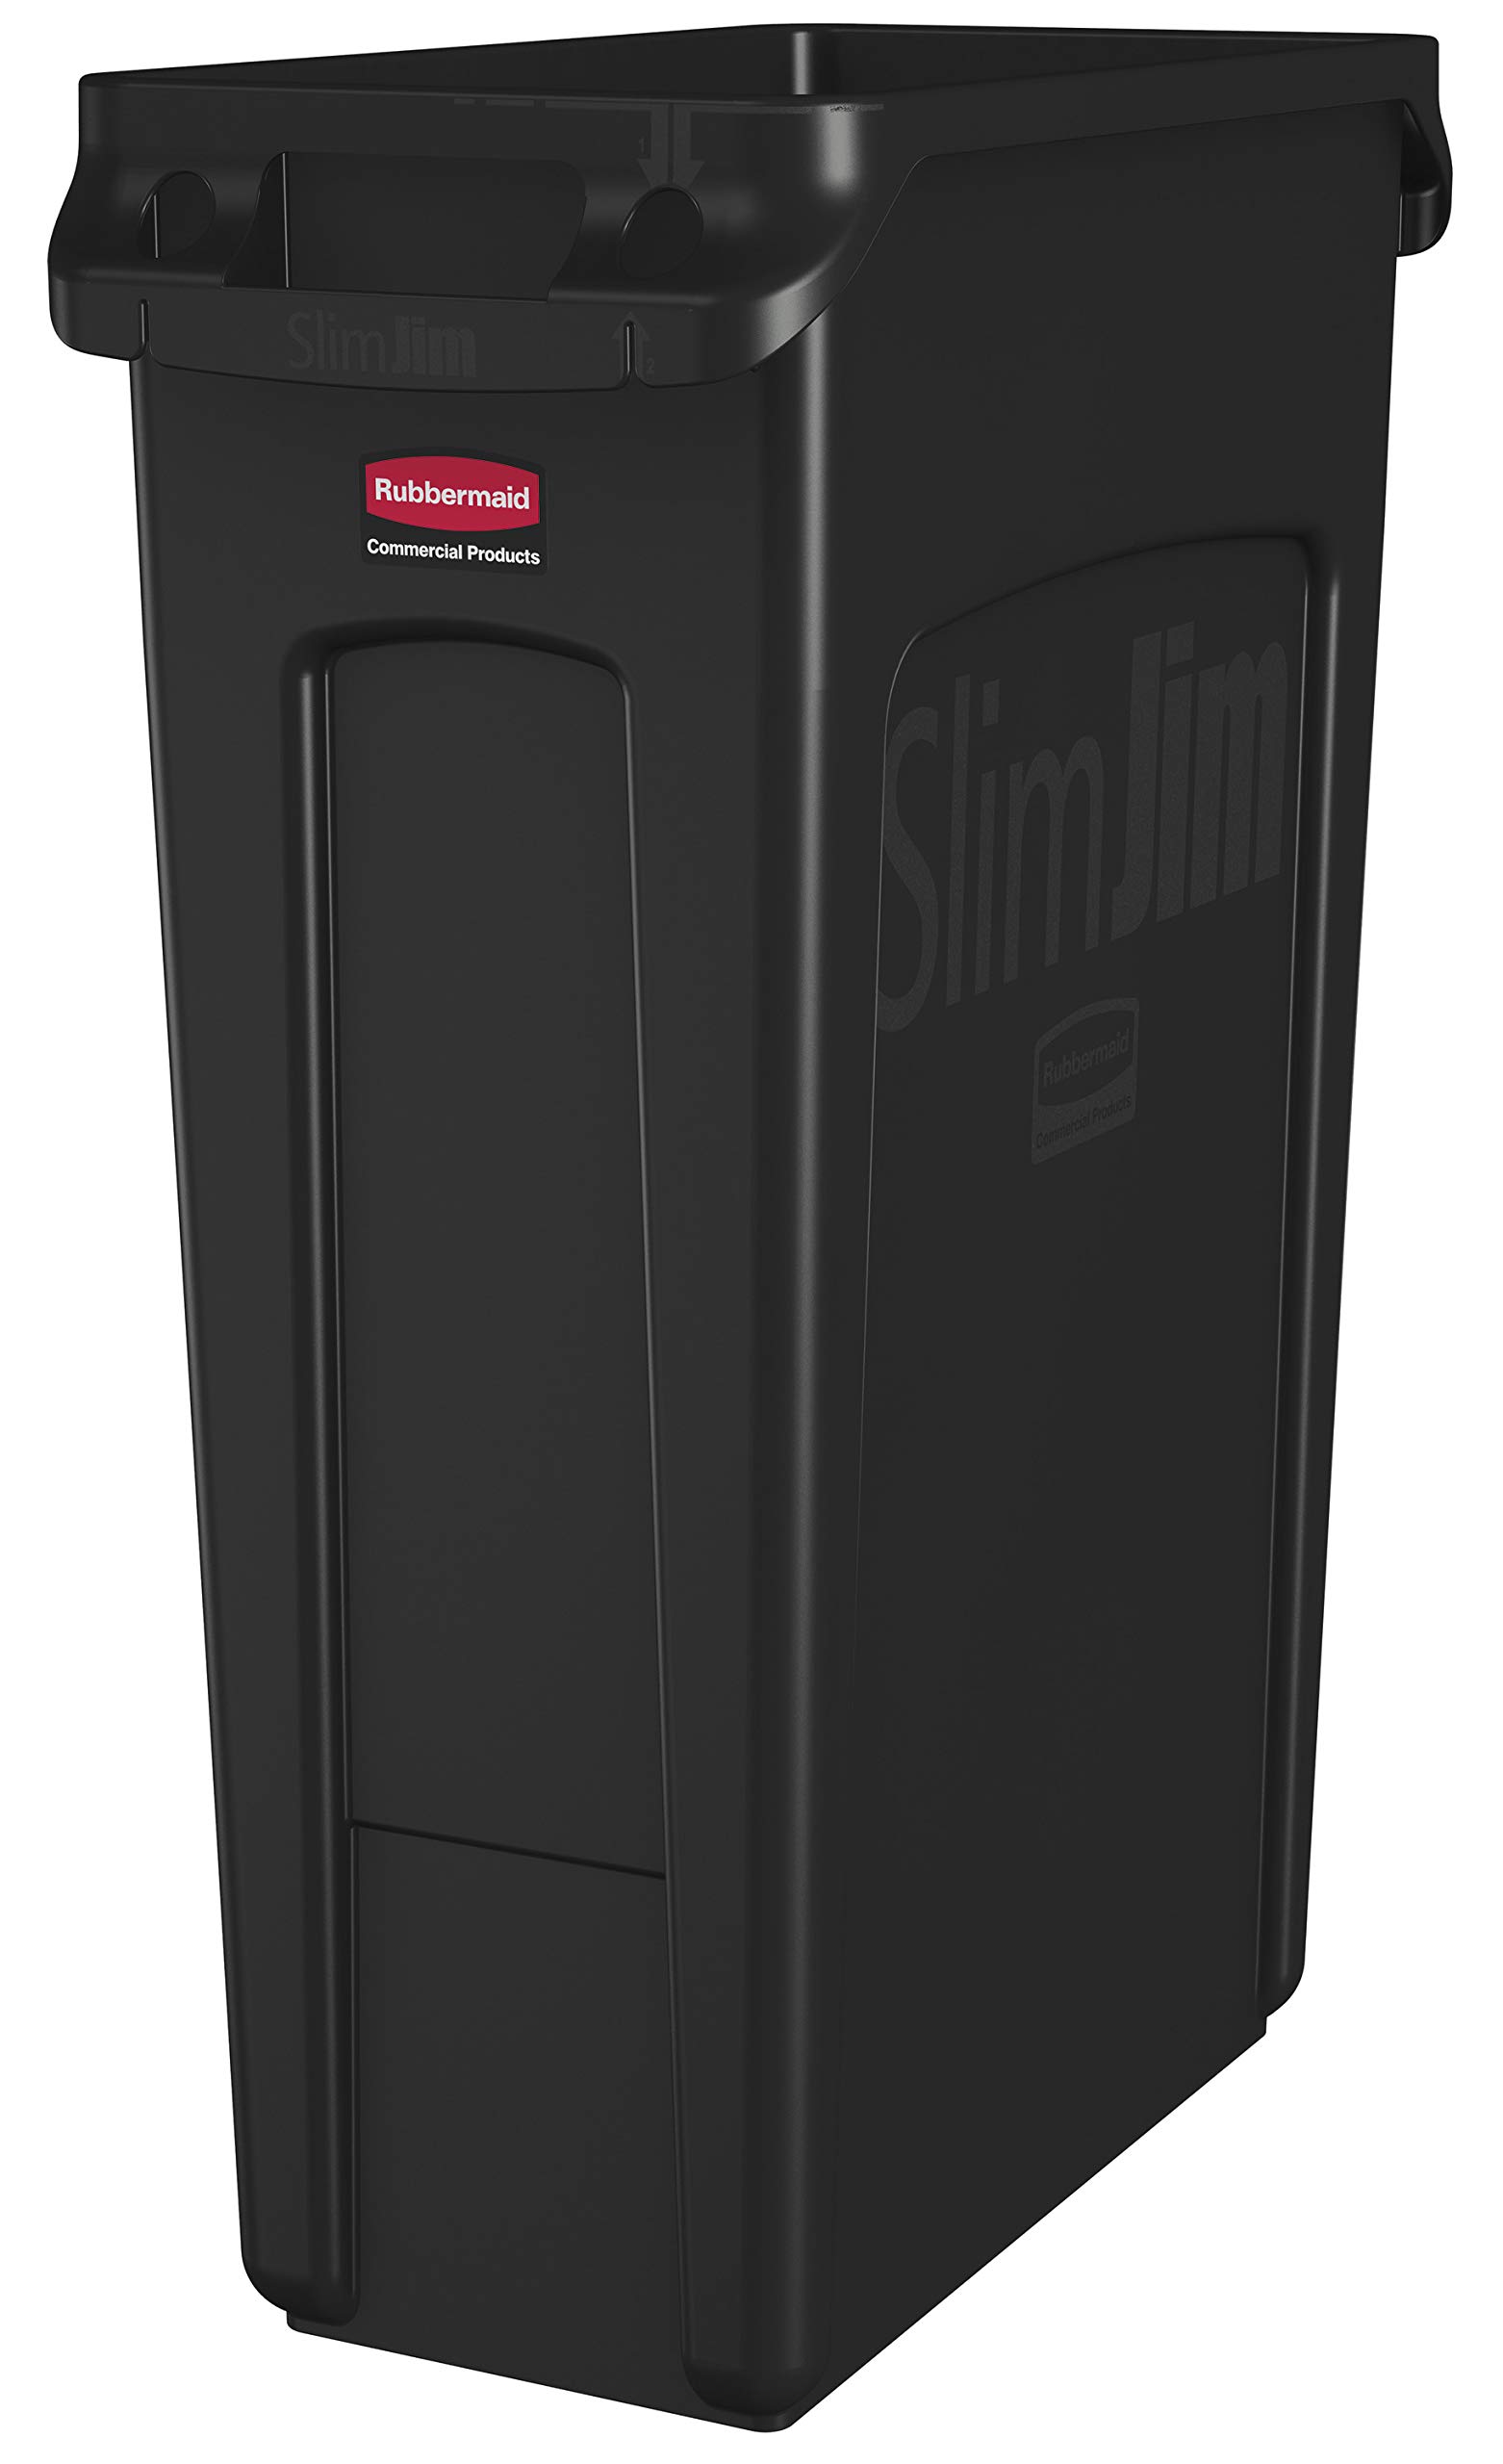 Rubbermaid Commercial Products Slim Jim Plastic Rectangular Trash/Garbage Can With Venting Channels